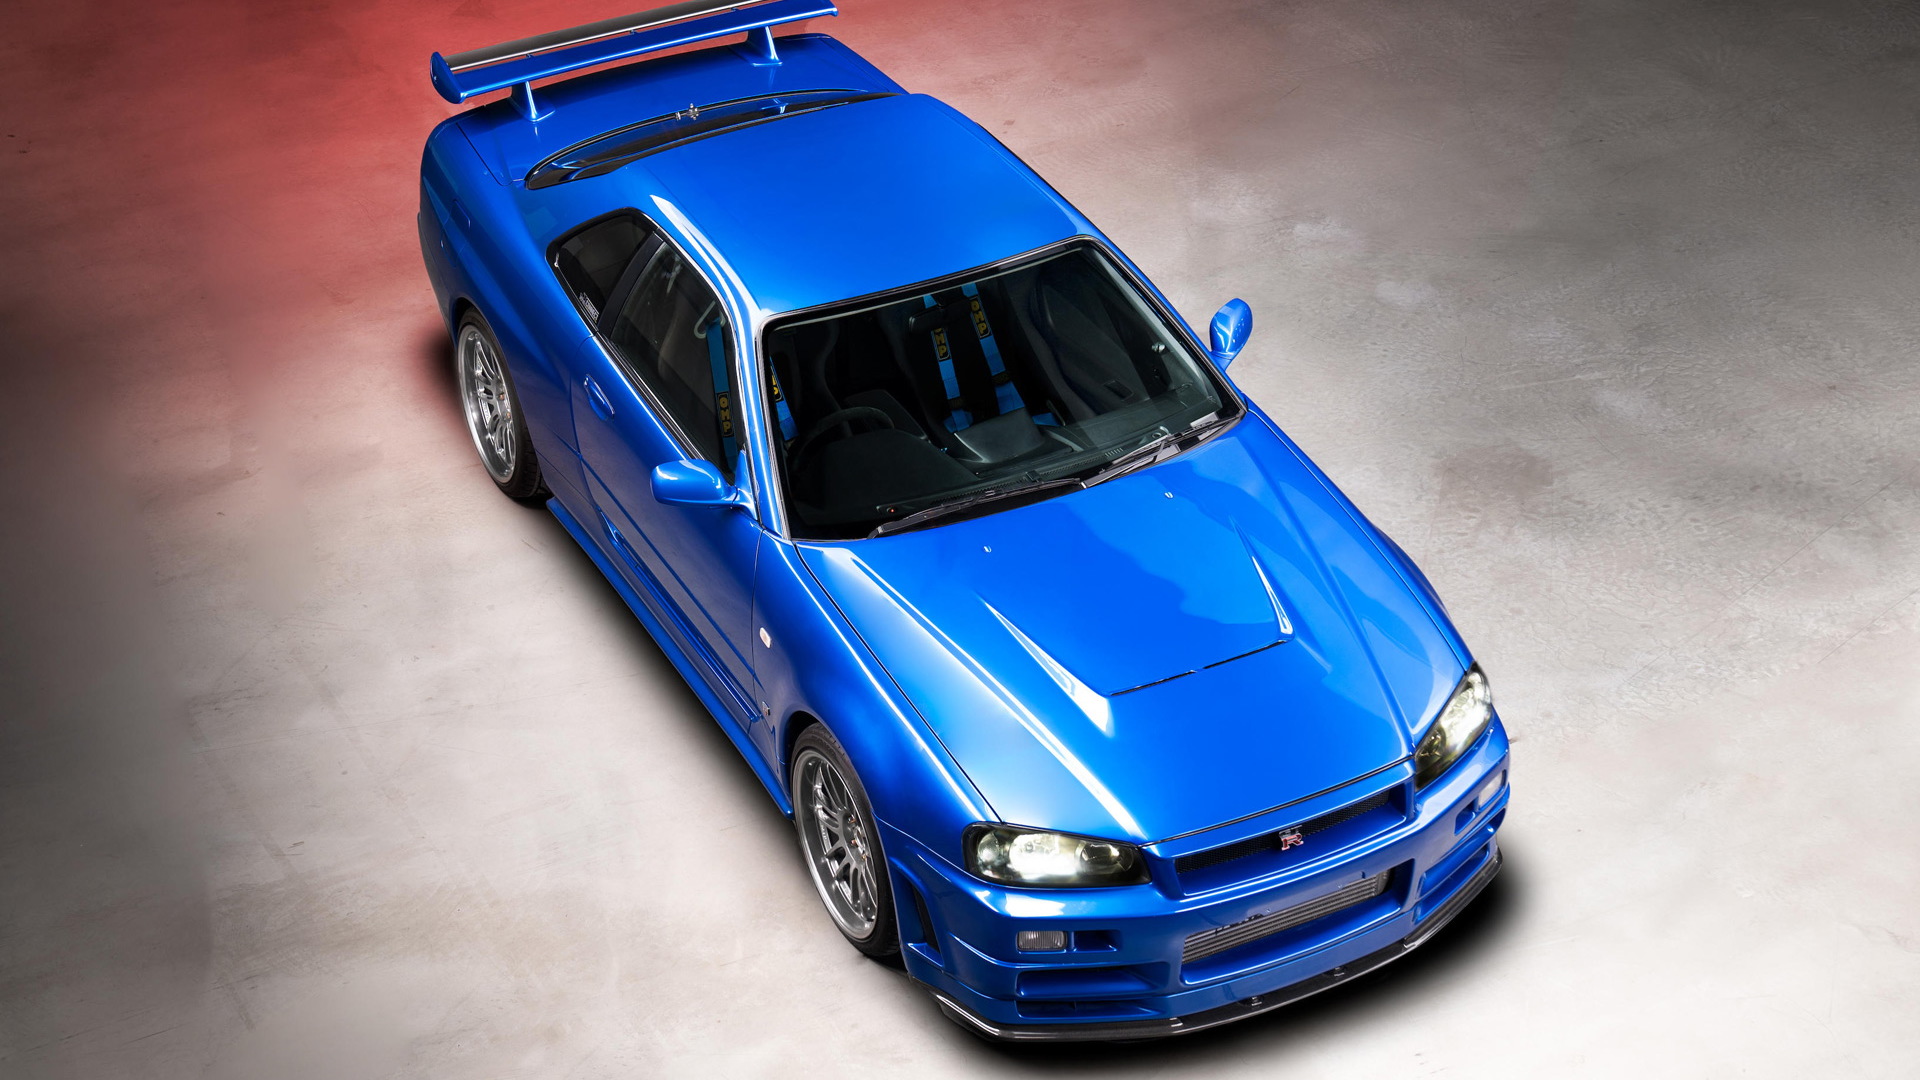 R34 Nissan Skyline GT-R from “Fast and Furious 4” - Photo credit: Bonhams